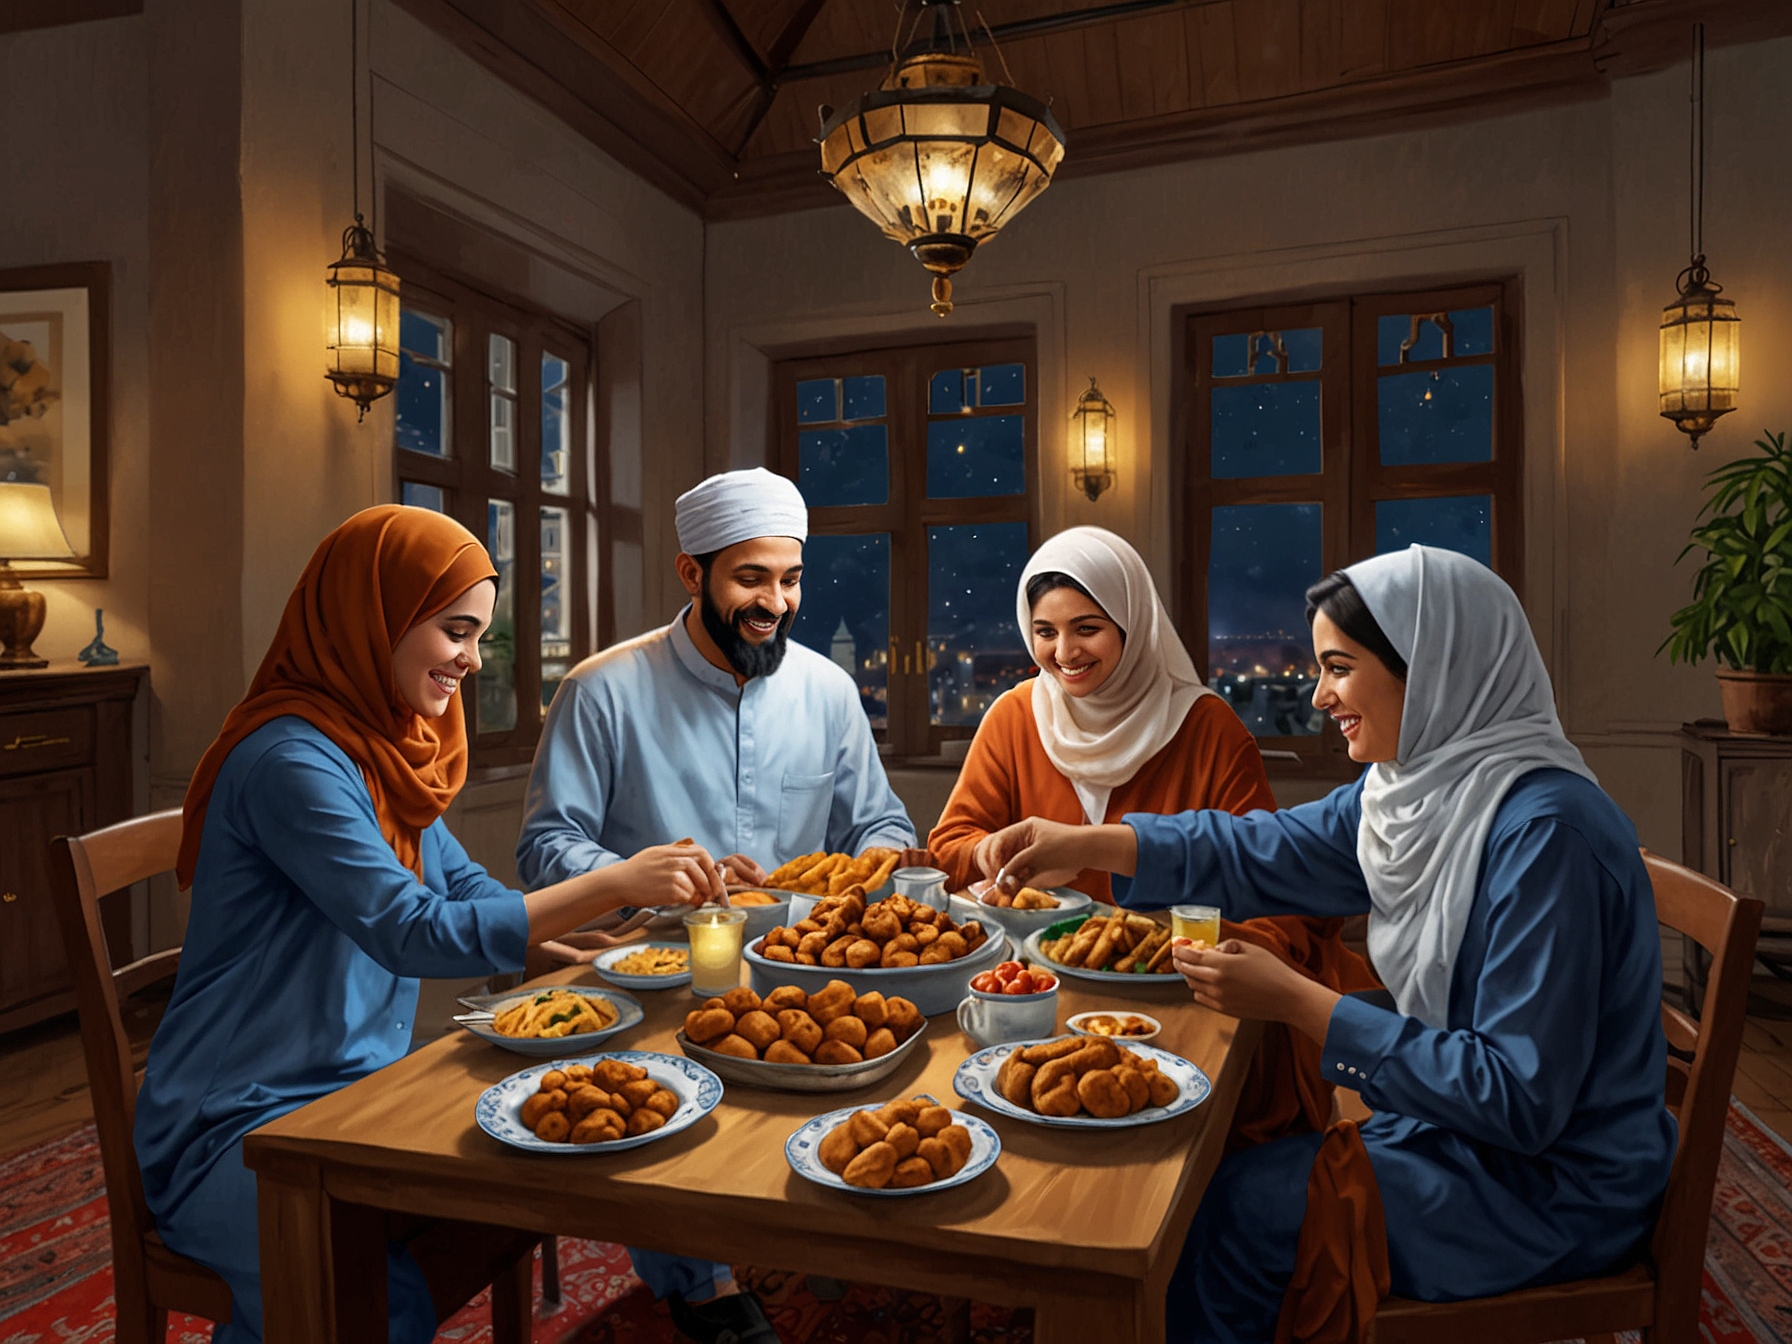 A family celebrating Eid al-Adha, sharing a festive meal together, capturing the cultural and religious significance of the holiday that leads to the closure of the stock exchanges in India.